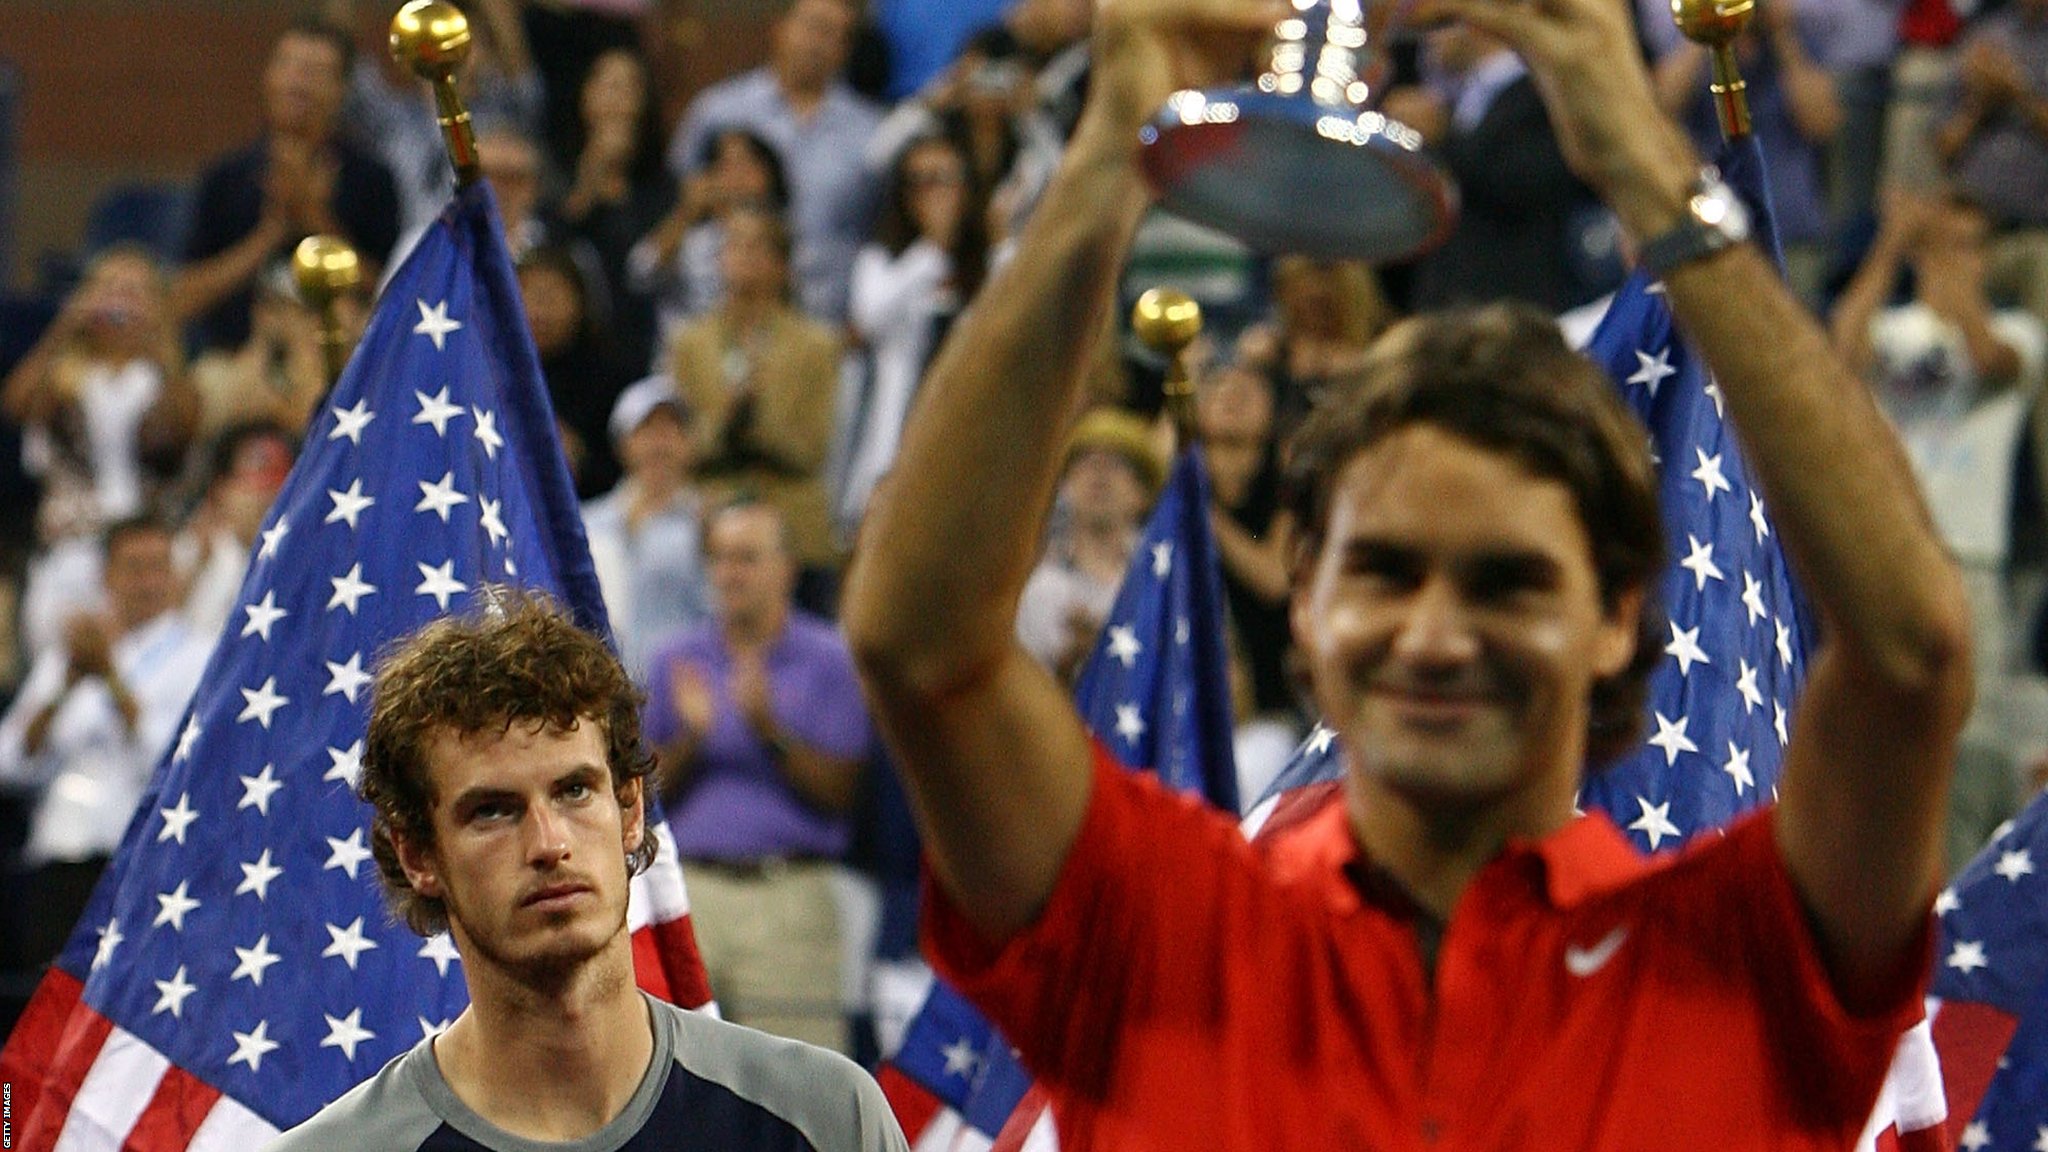 Andy Murray loses to Roger Federer at the US Open final in 2008